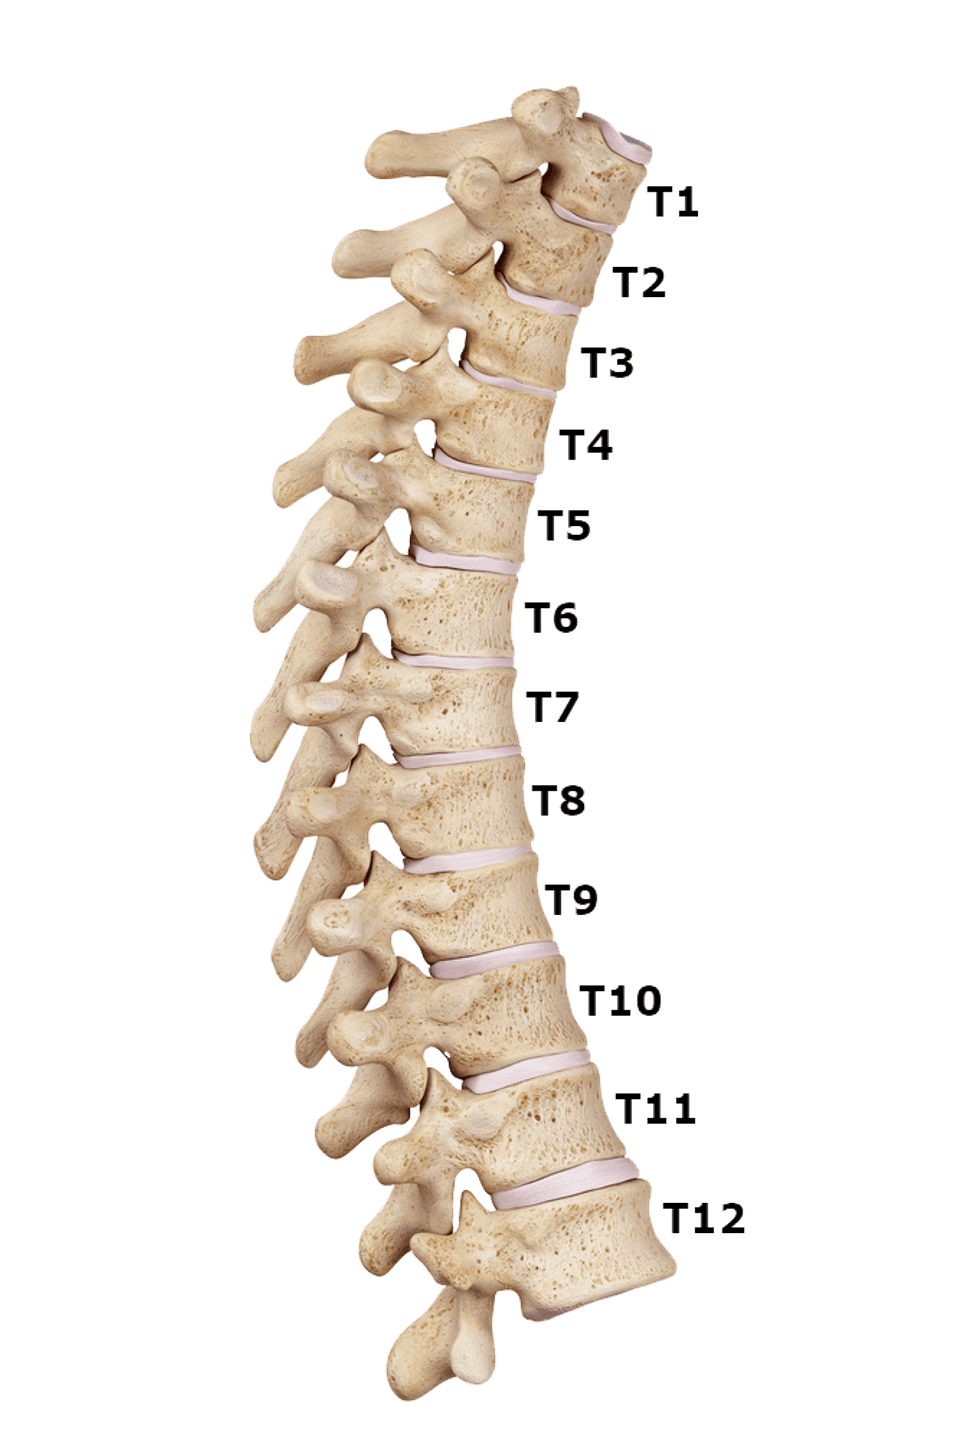 Thoracic labeled